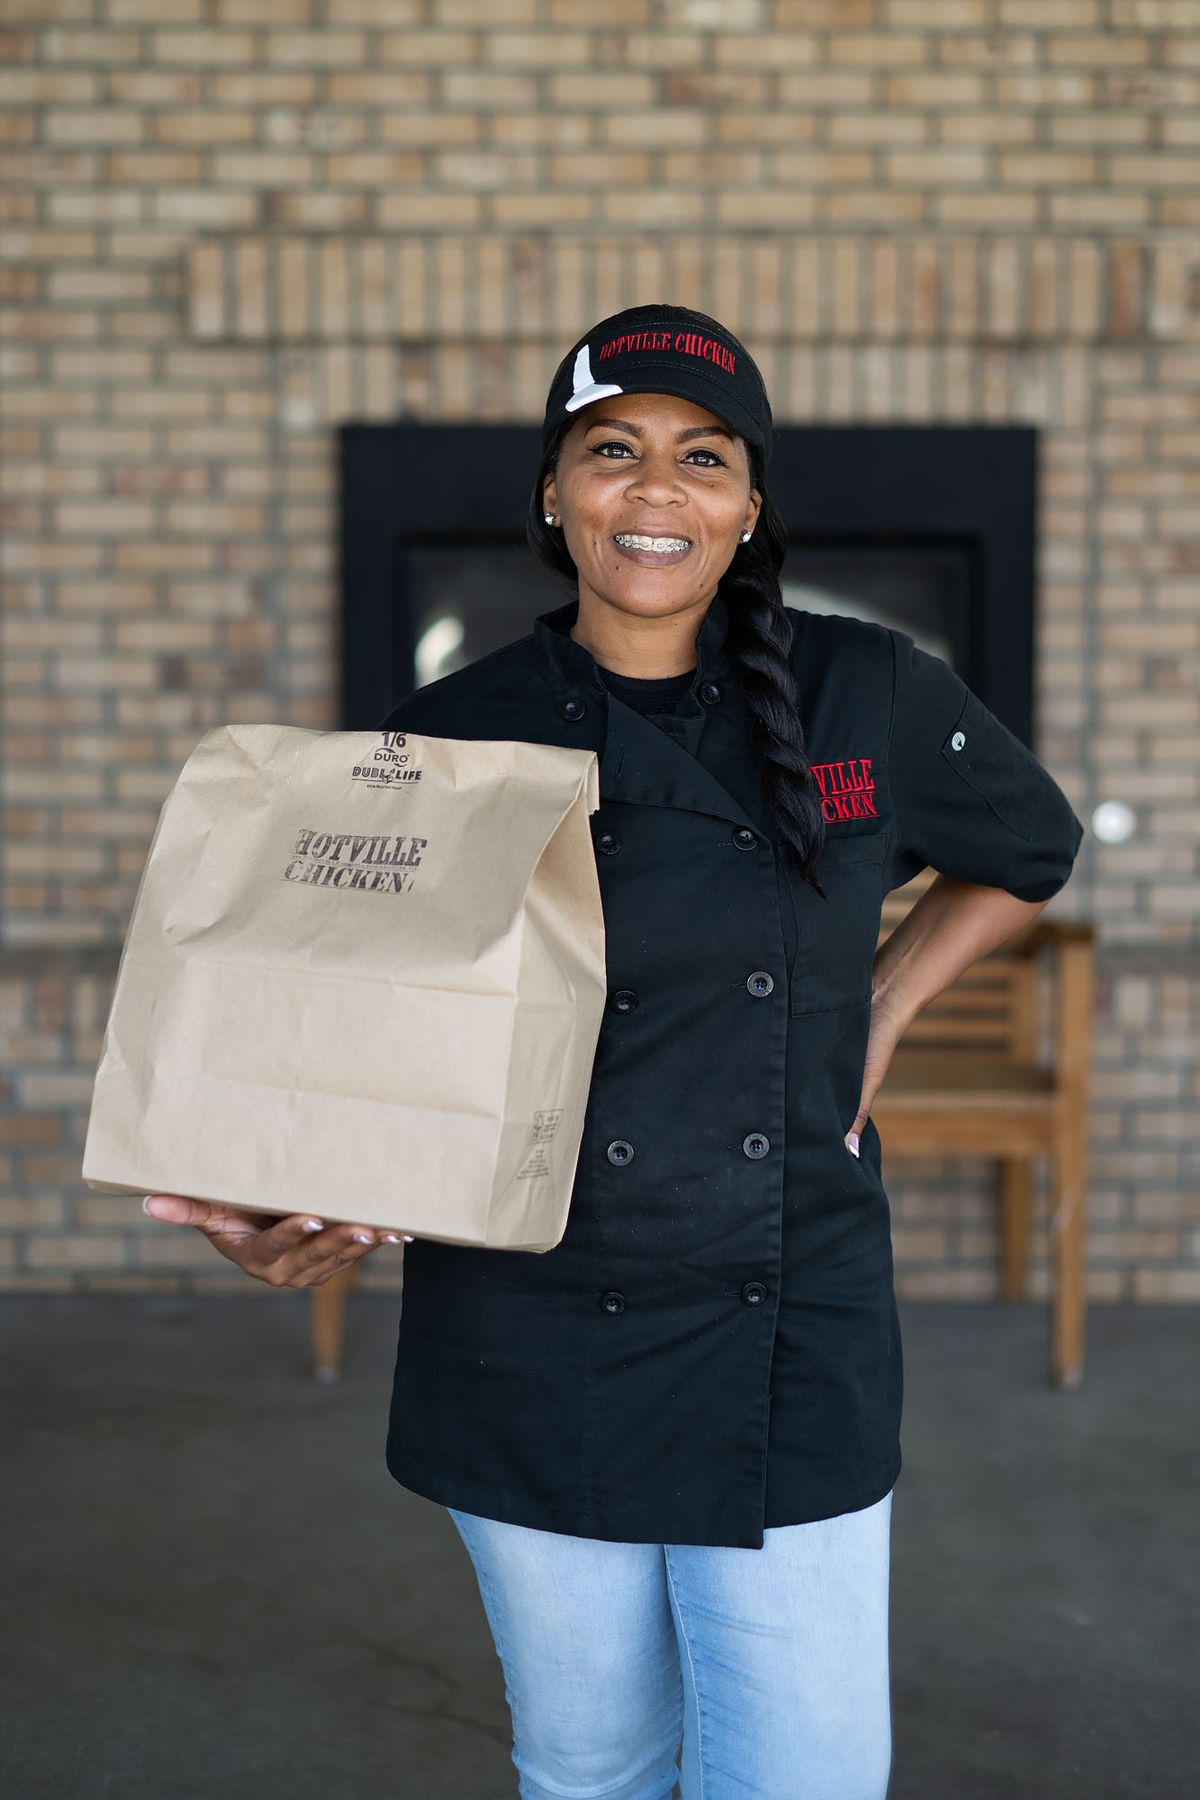 A Black woman wearing a black kitchen uniform holds a brown paper bag and smiles at the camera with a hand on her hip.